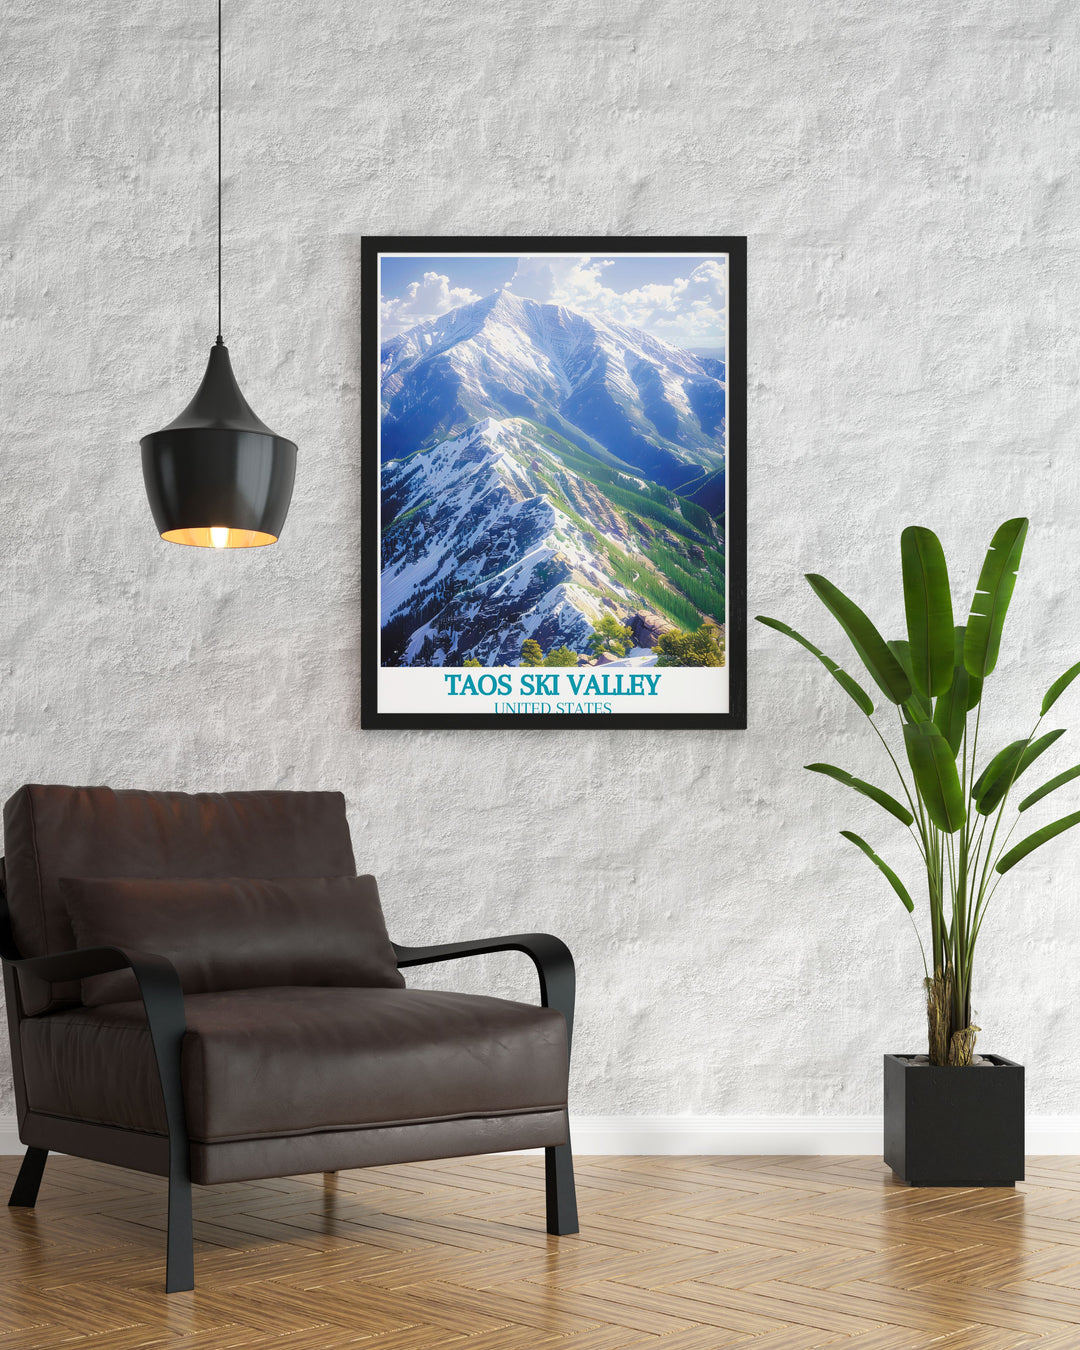 Discover the picturesque landscape of Taos Ski Valley with this exquisite travel poster, illustrating the pristine snow and dramatic peaks.